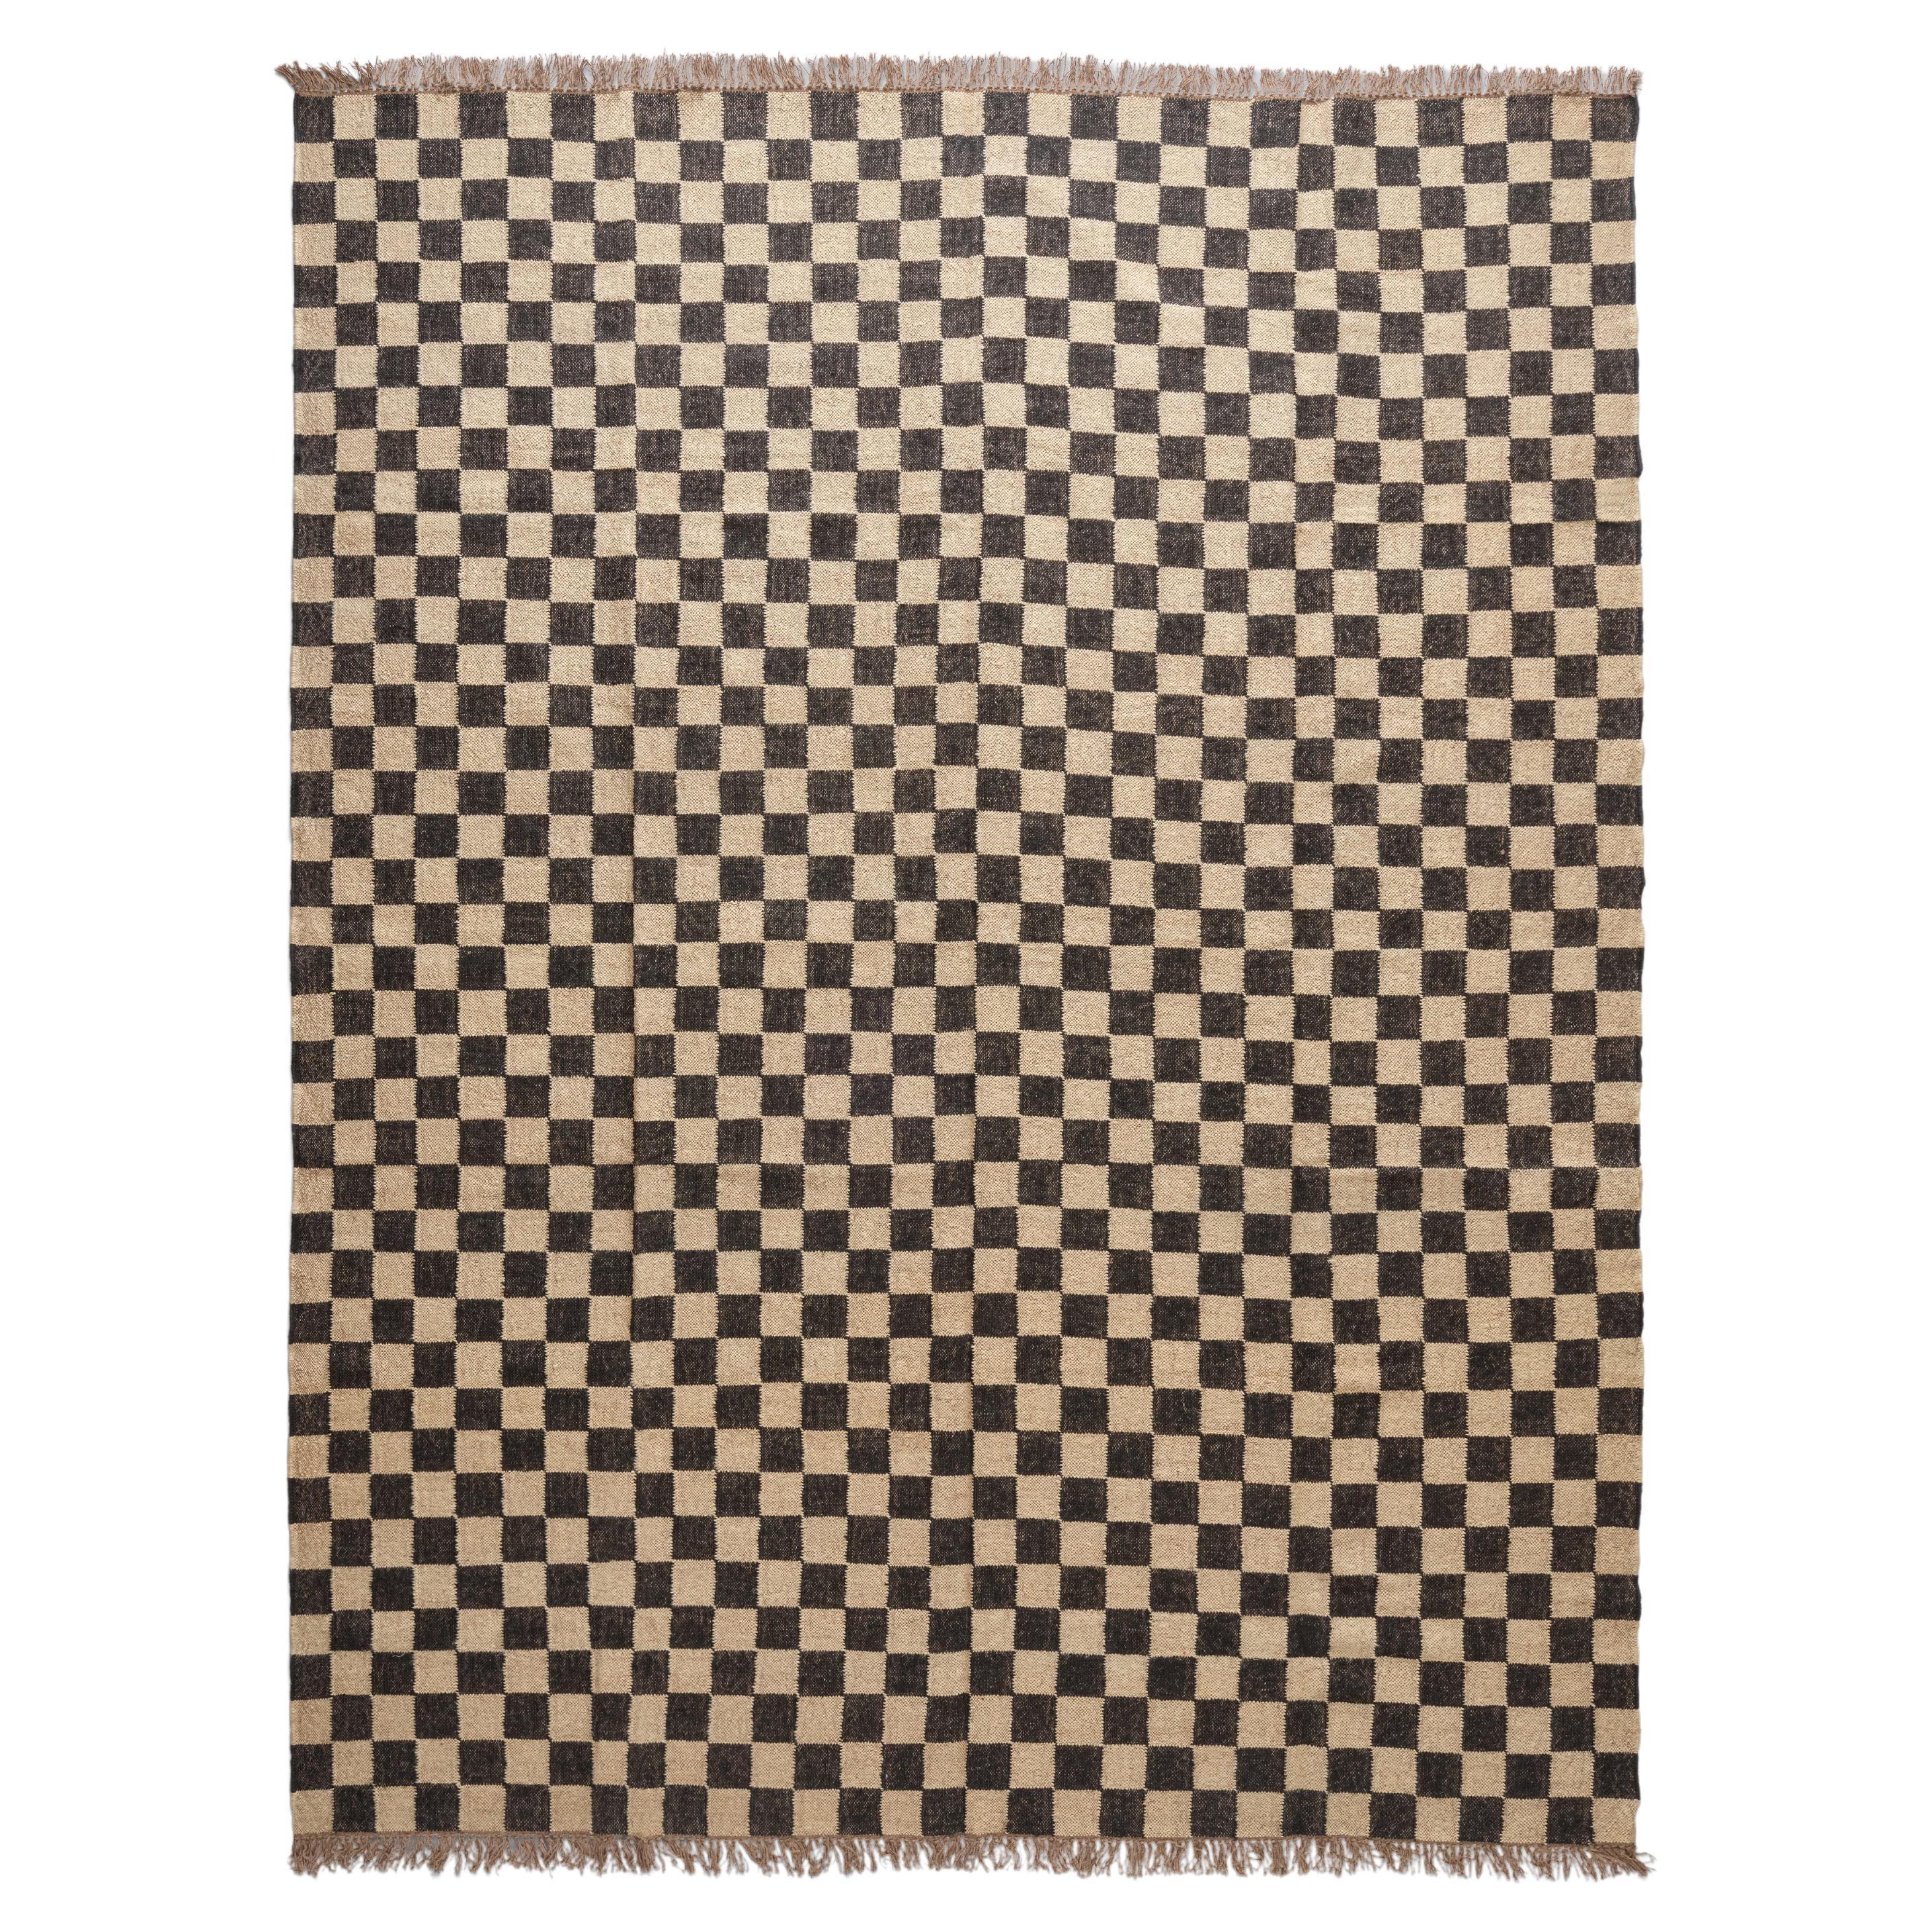 The Forsyth Checkerboard Rug - Off Black, 8x10 For Sale